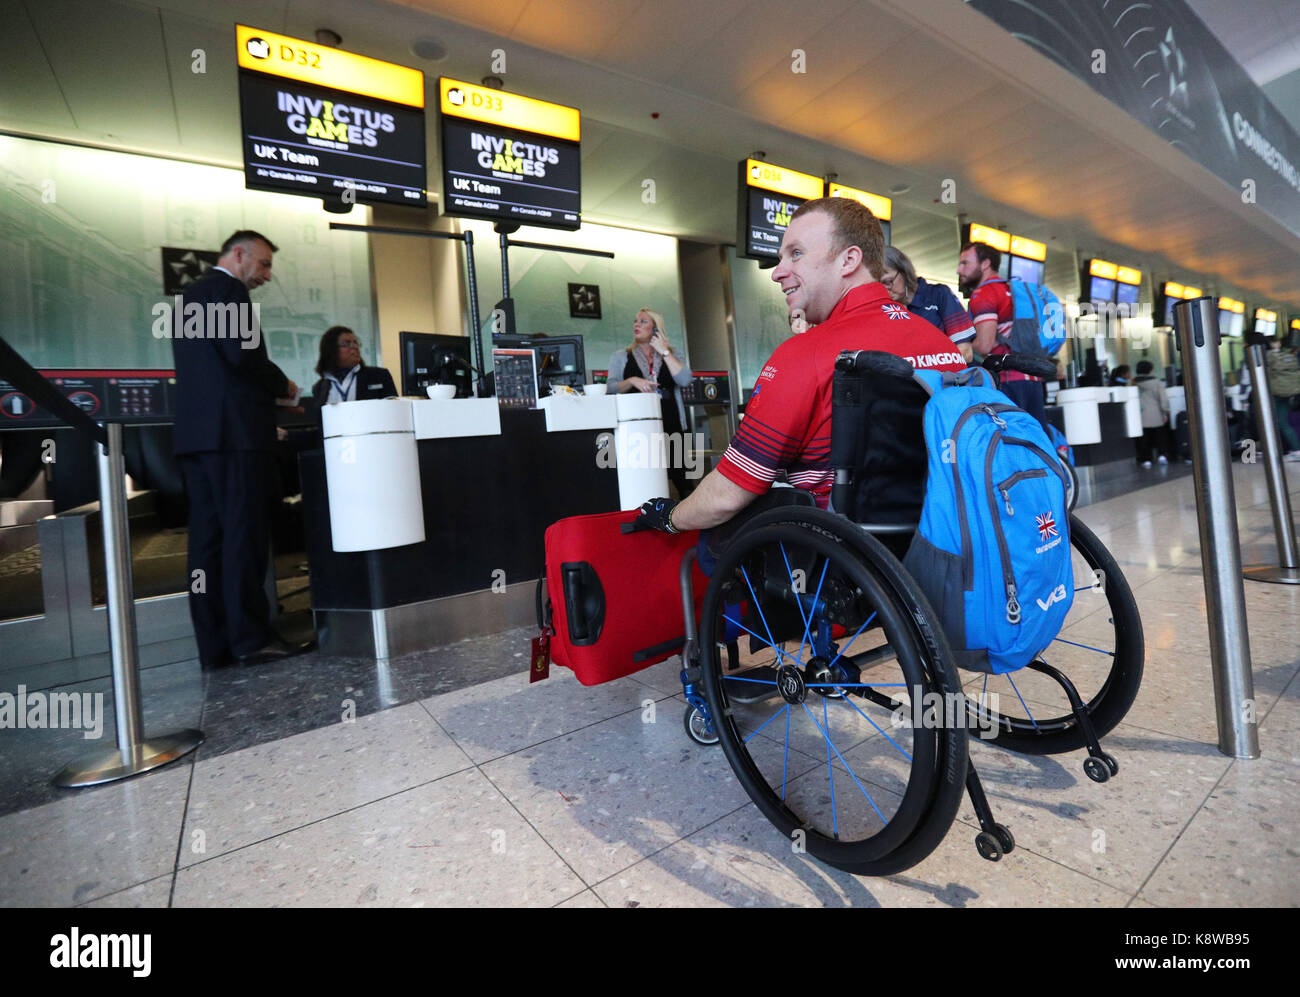 Swimming And Archery Competitor Jack Cummings At The Check In Desk